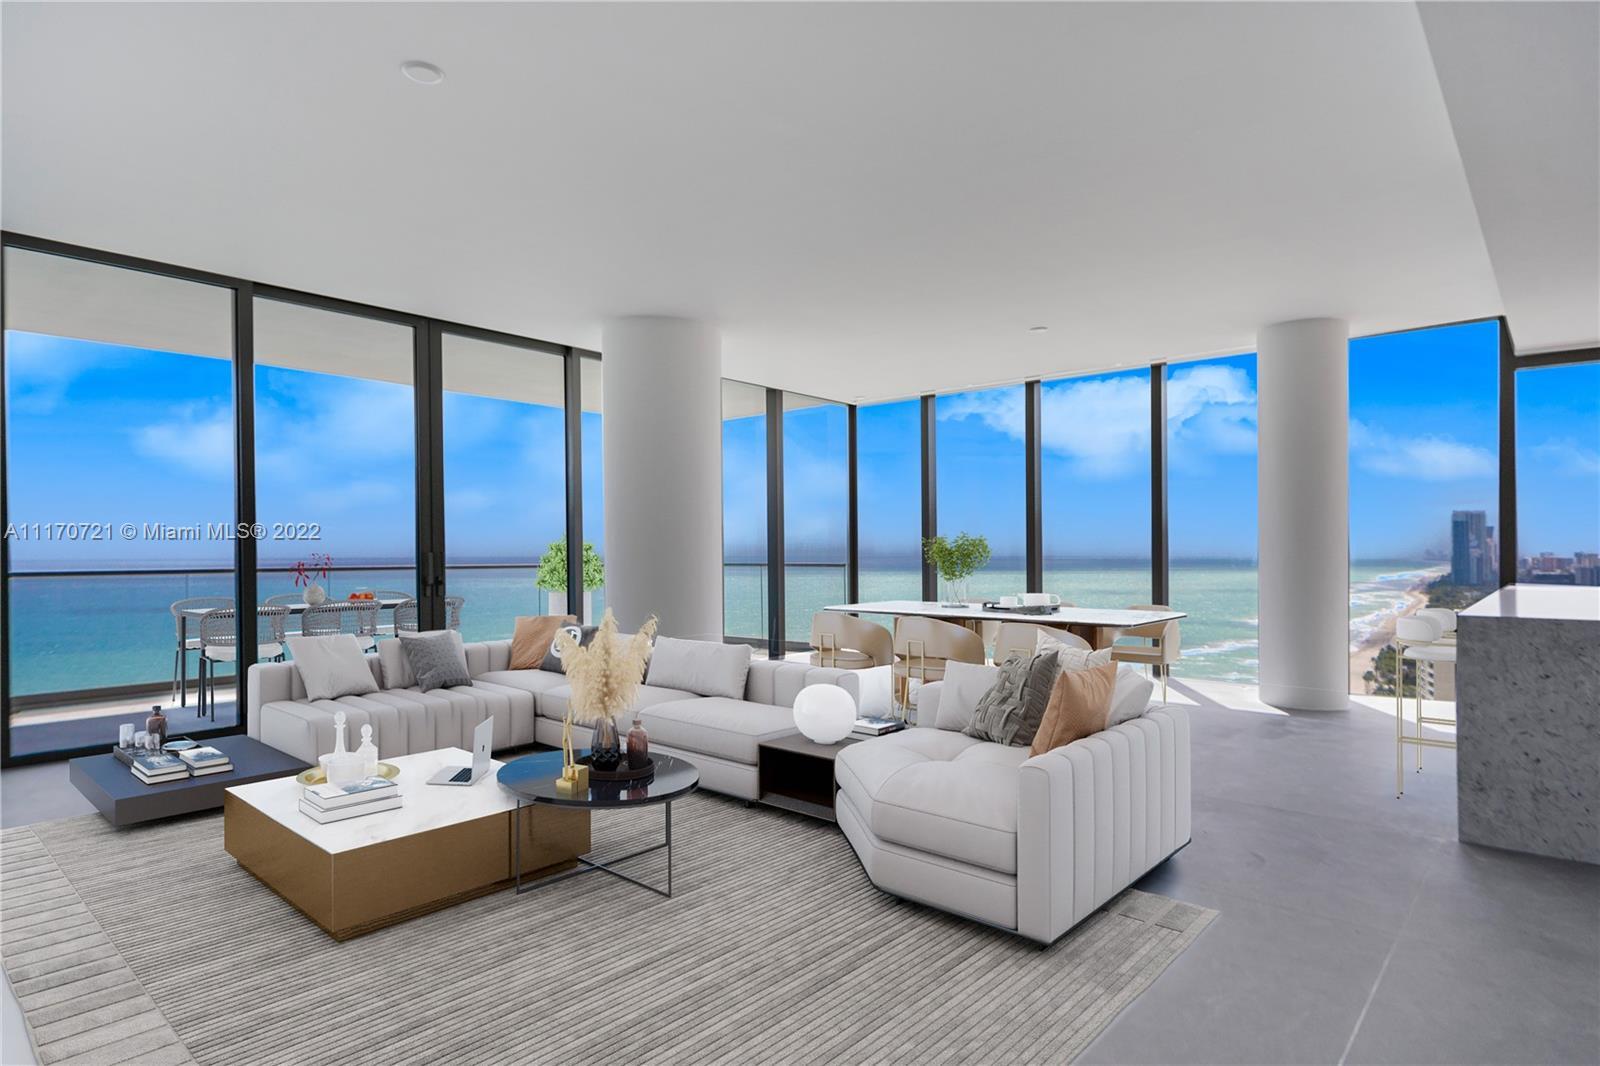 New contemporary 40 story glass tower w/only 63 residences & EXPANSIVE OCEAN VIEWS. Lock-in 3% inter